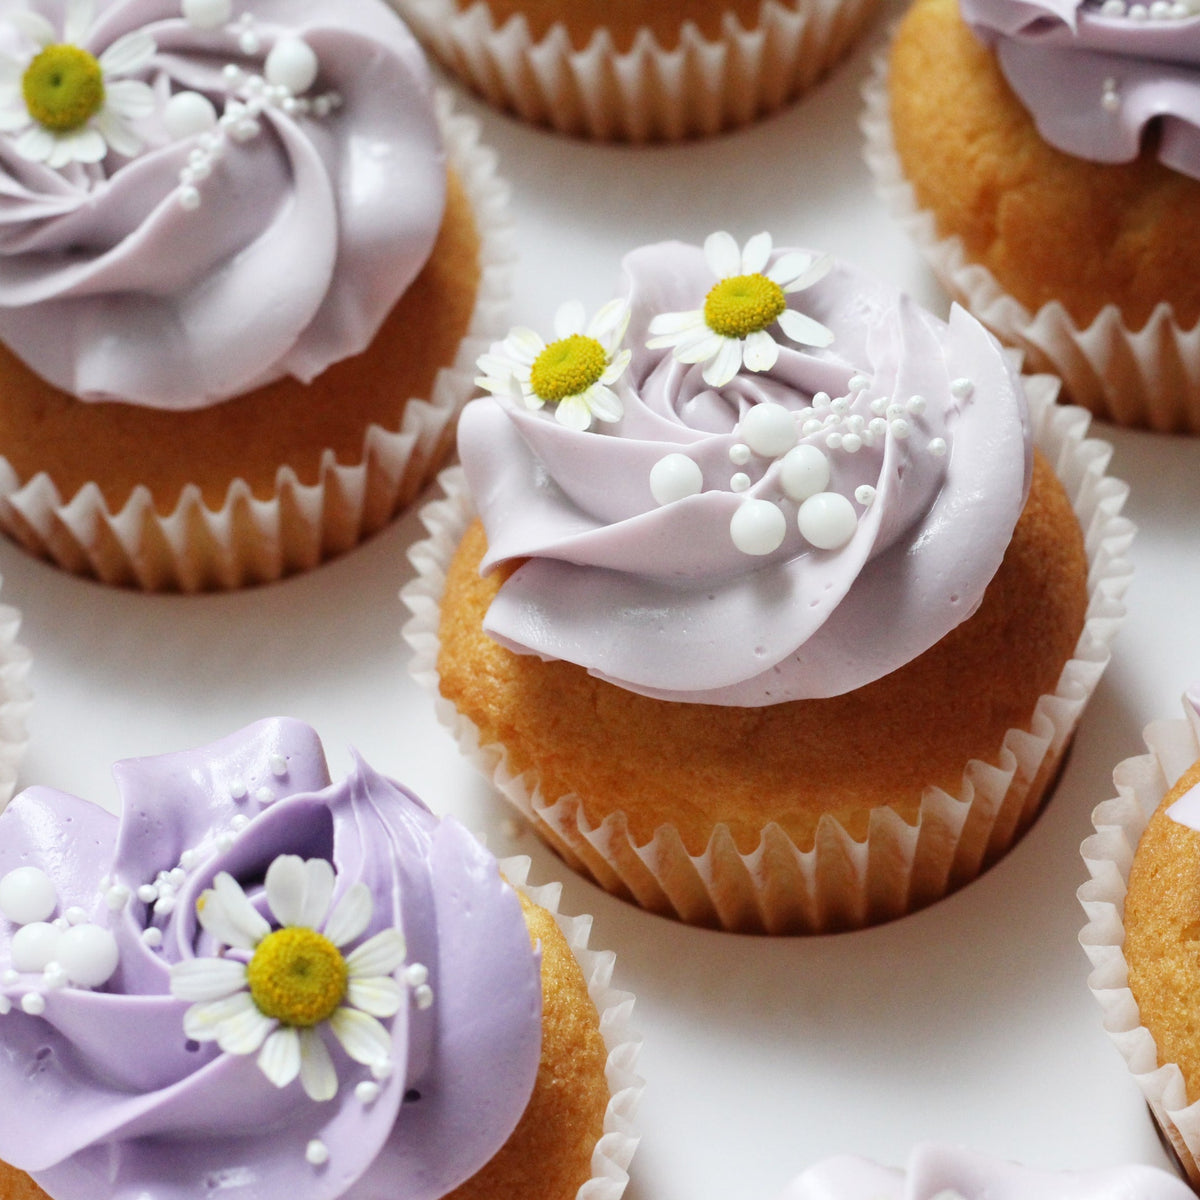 Our signature cupcakes with lilac buttercream, adorned with daisies on top!